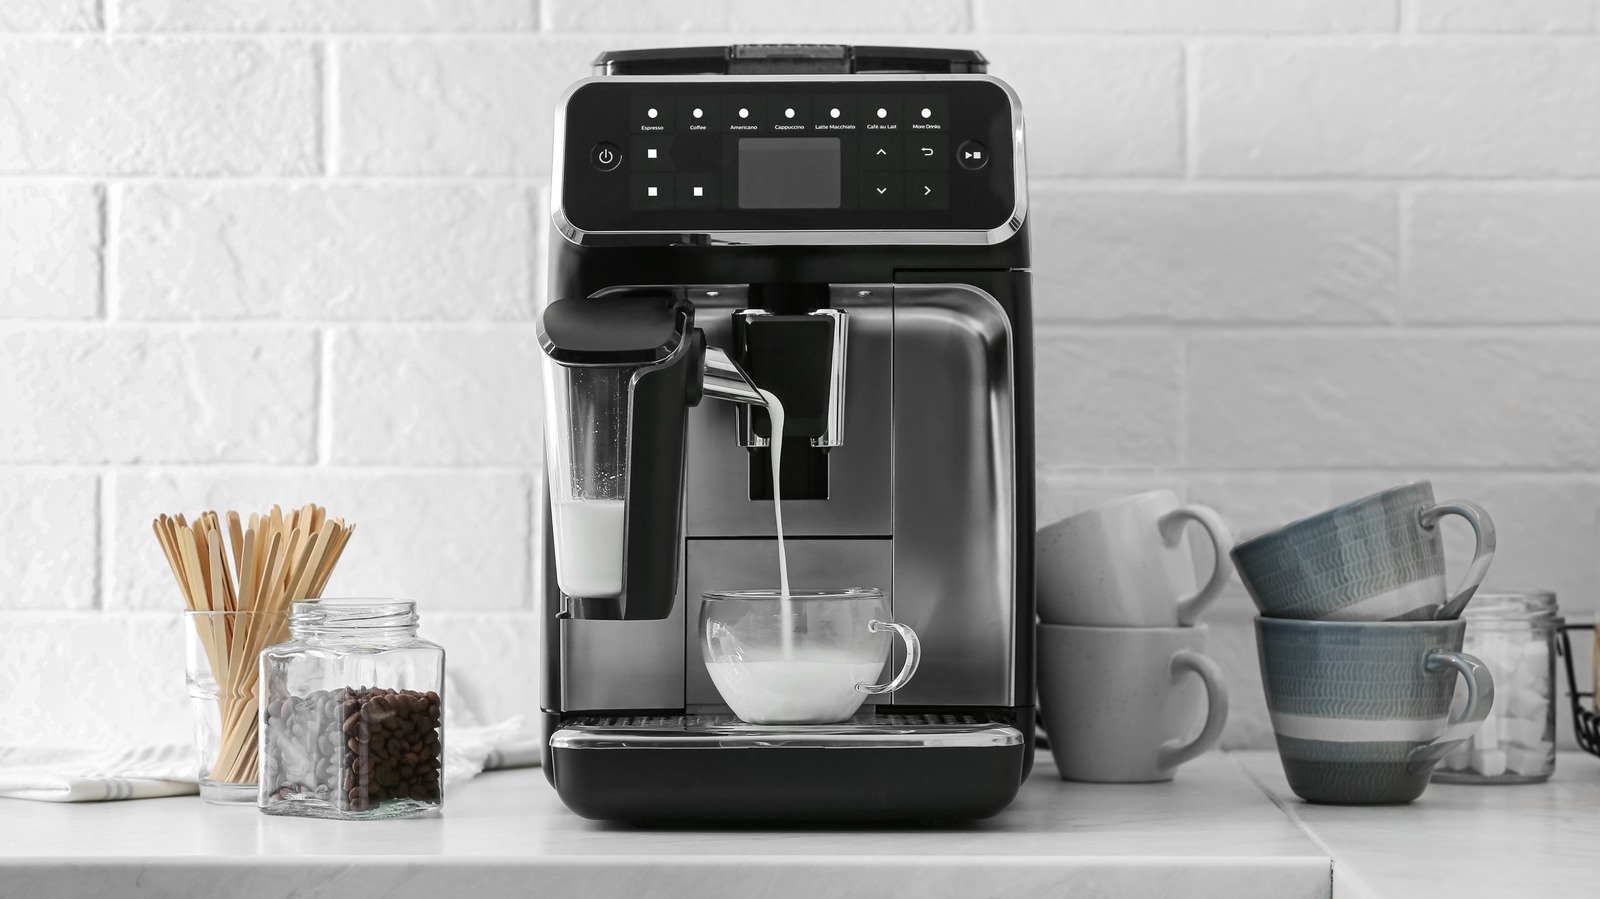 60 off Philips L'or Barista on Prime Day - Global Village Space